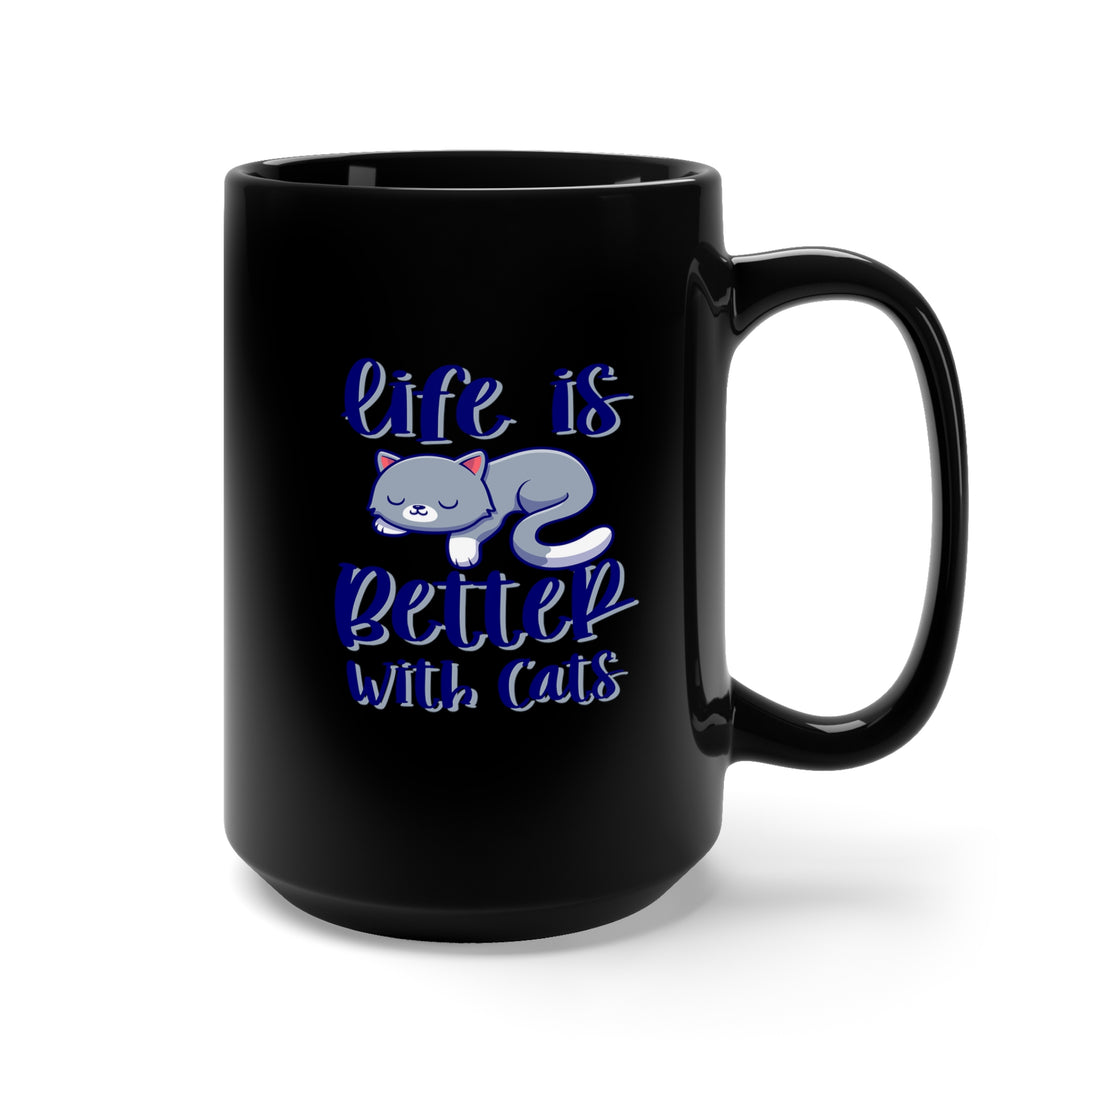 Life Is Better With Cats - Large 15oz Black Mug